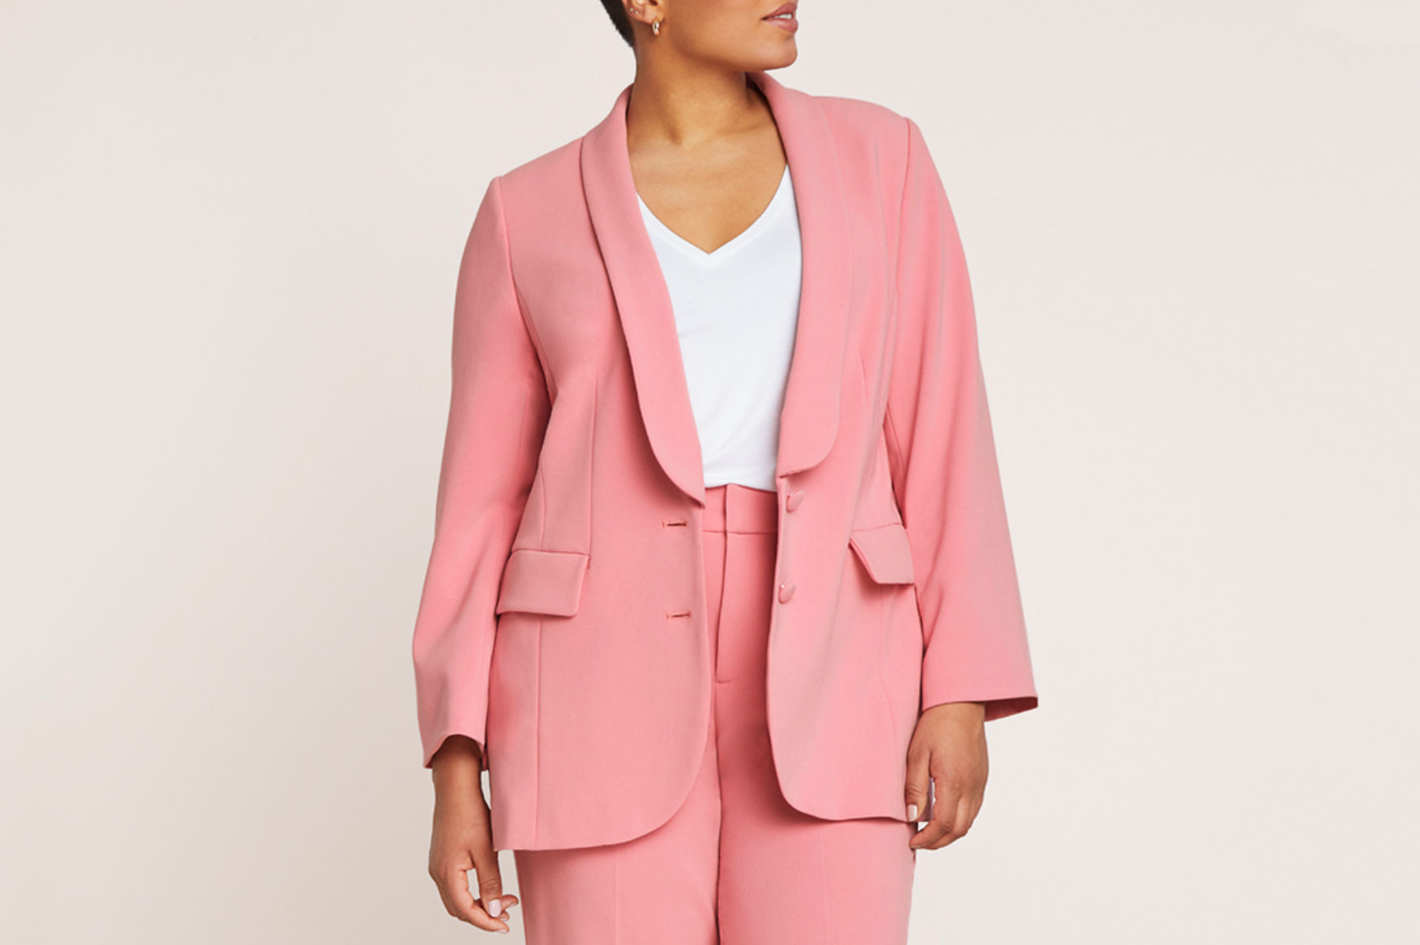 The 15 Best Work Blazers for the Professional Woman, 2018